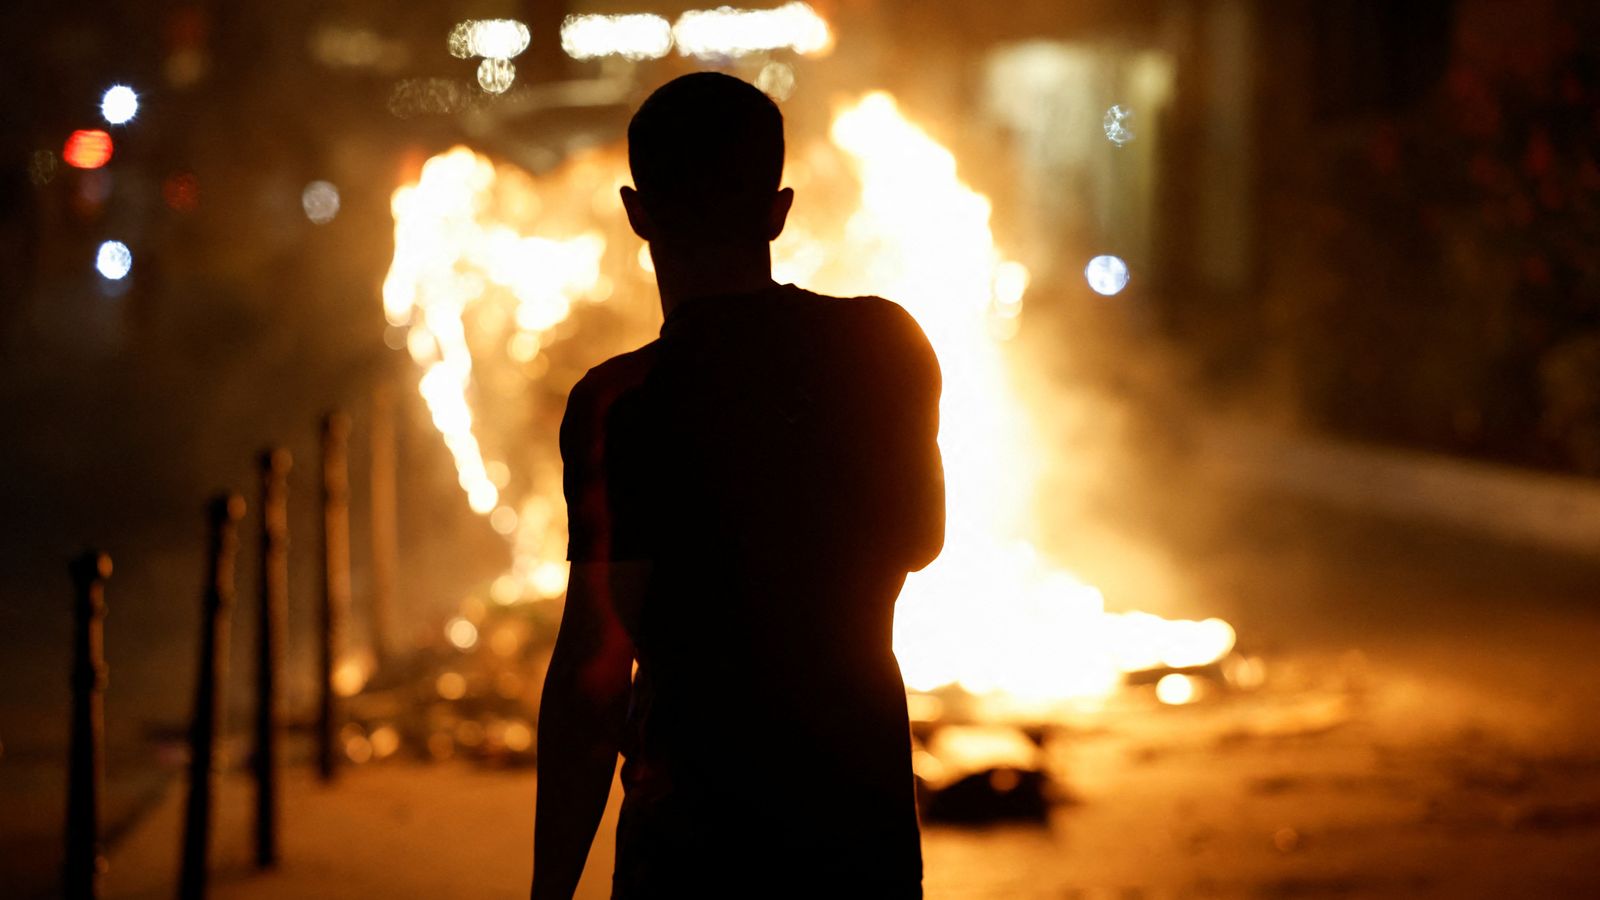 France riots: Another night of looting and lawlessness - and nobody knows what will happen next